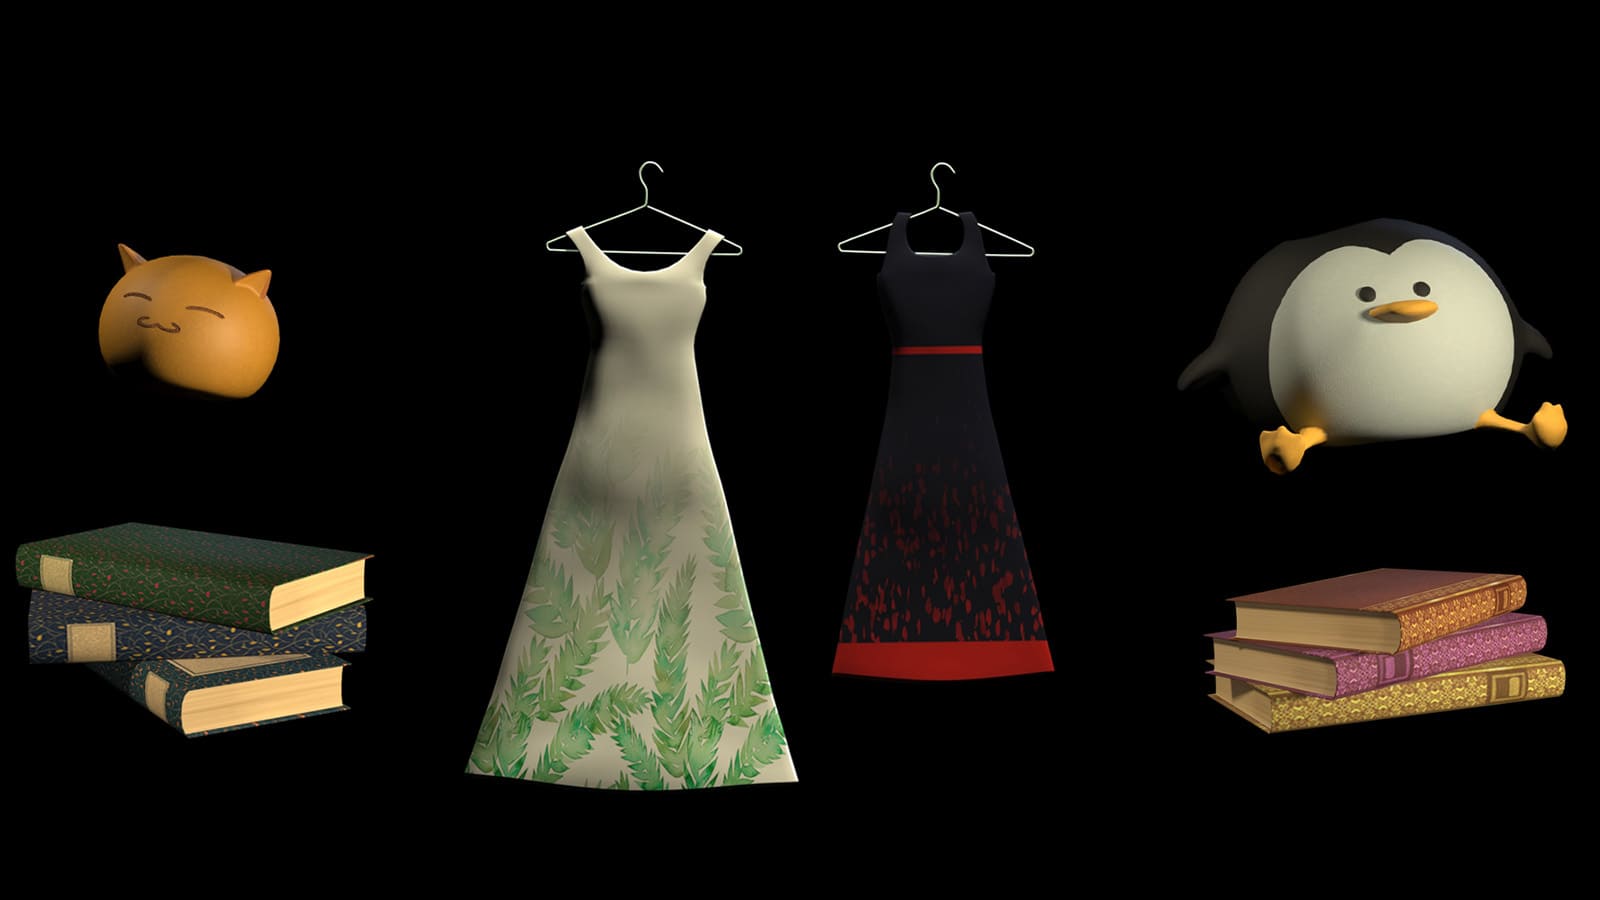 Exhibition of Skye&#039;s personal items designed in 3D, including books, stuffed animals, and dresses.